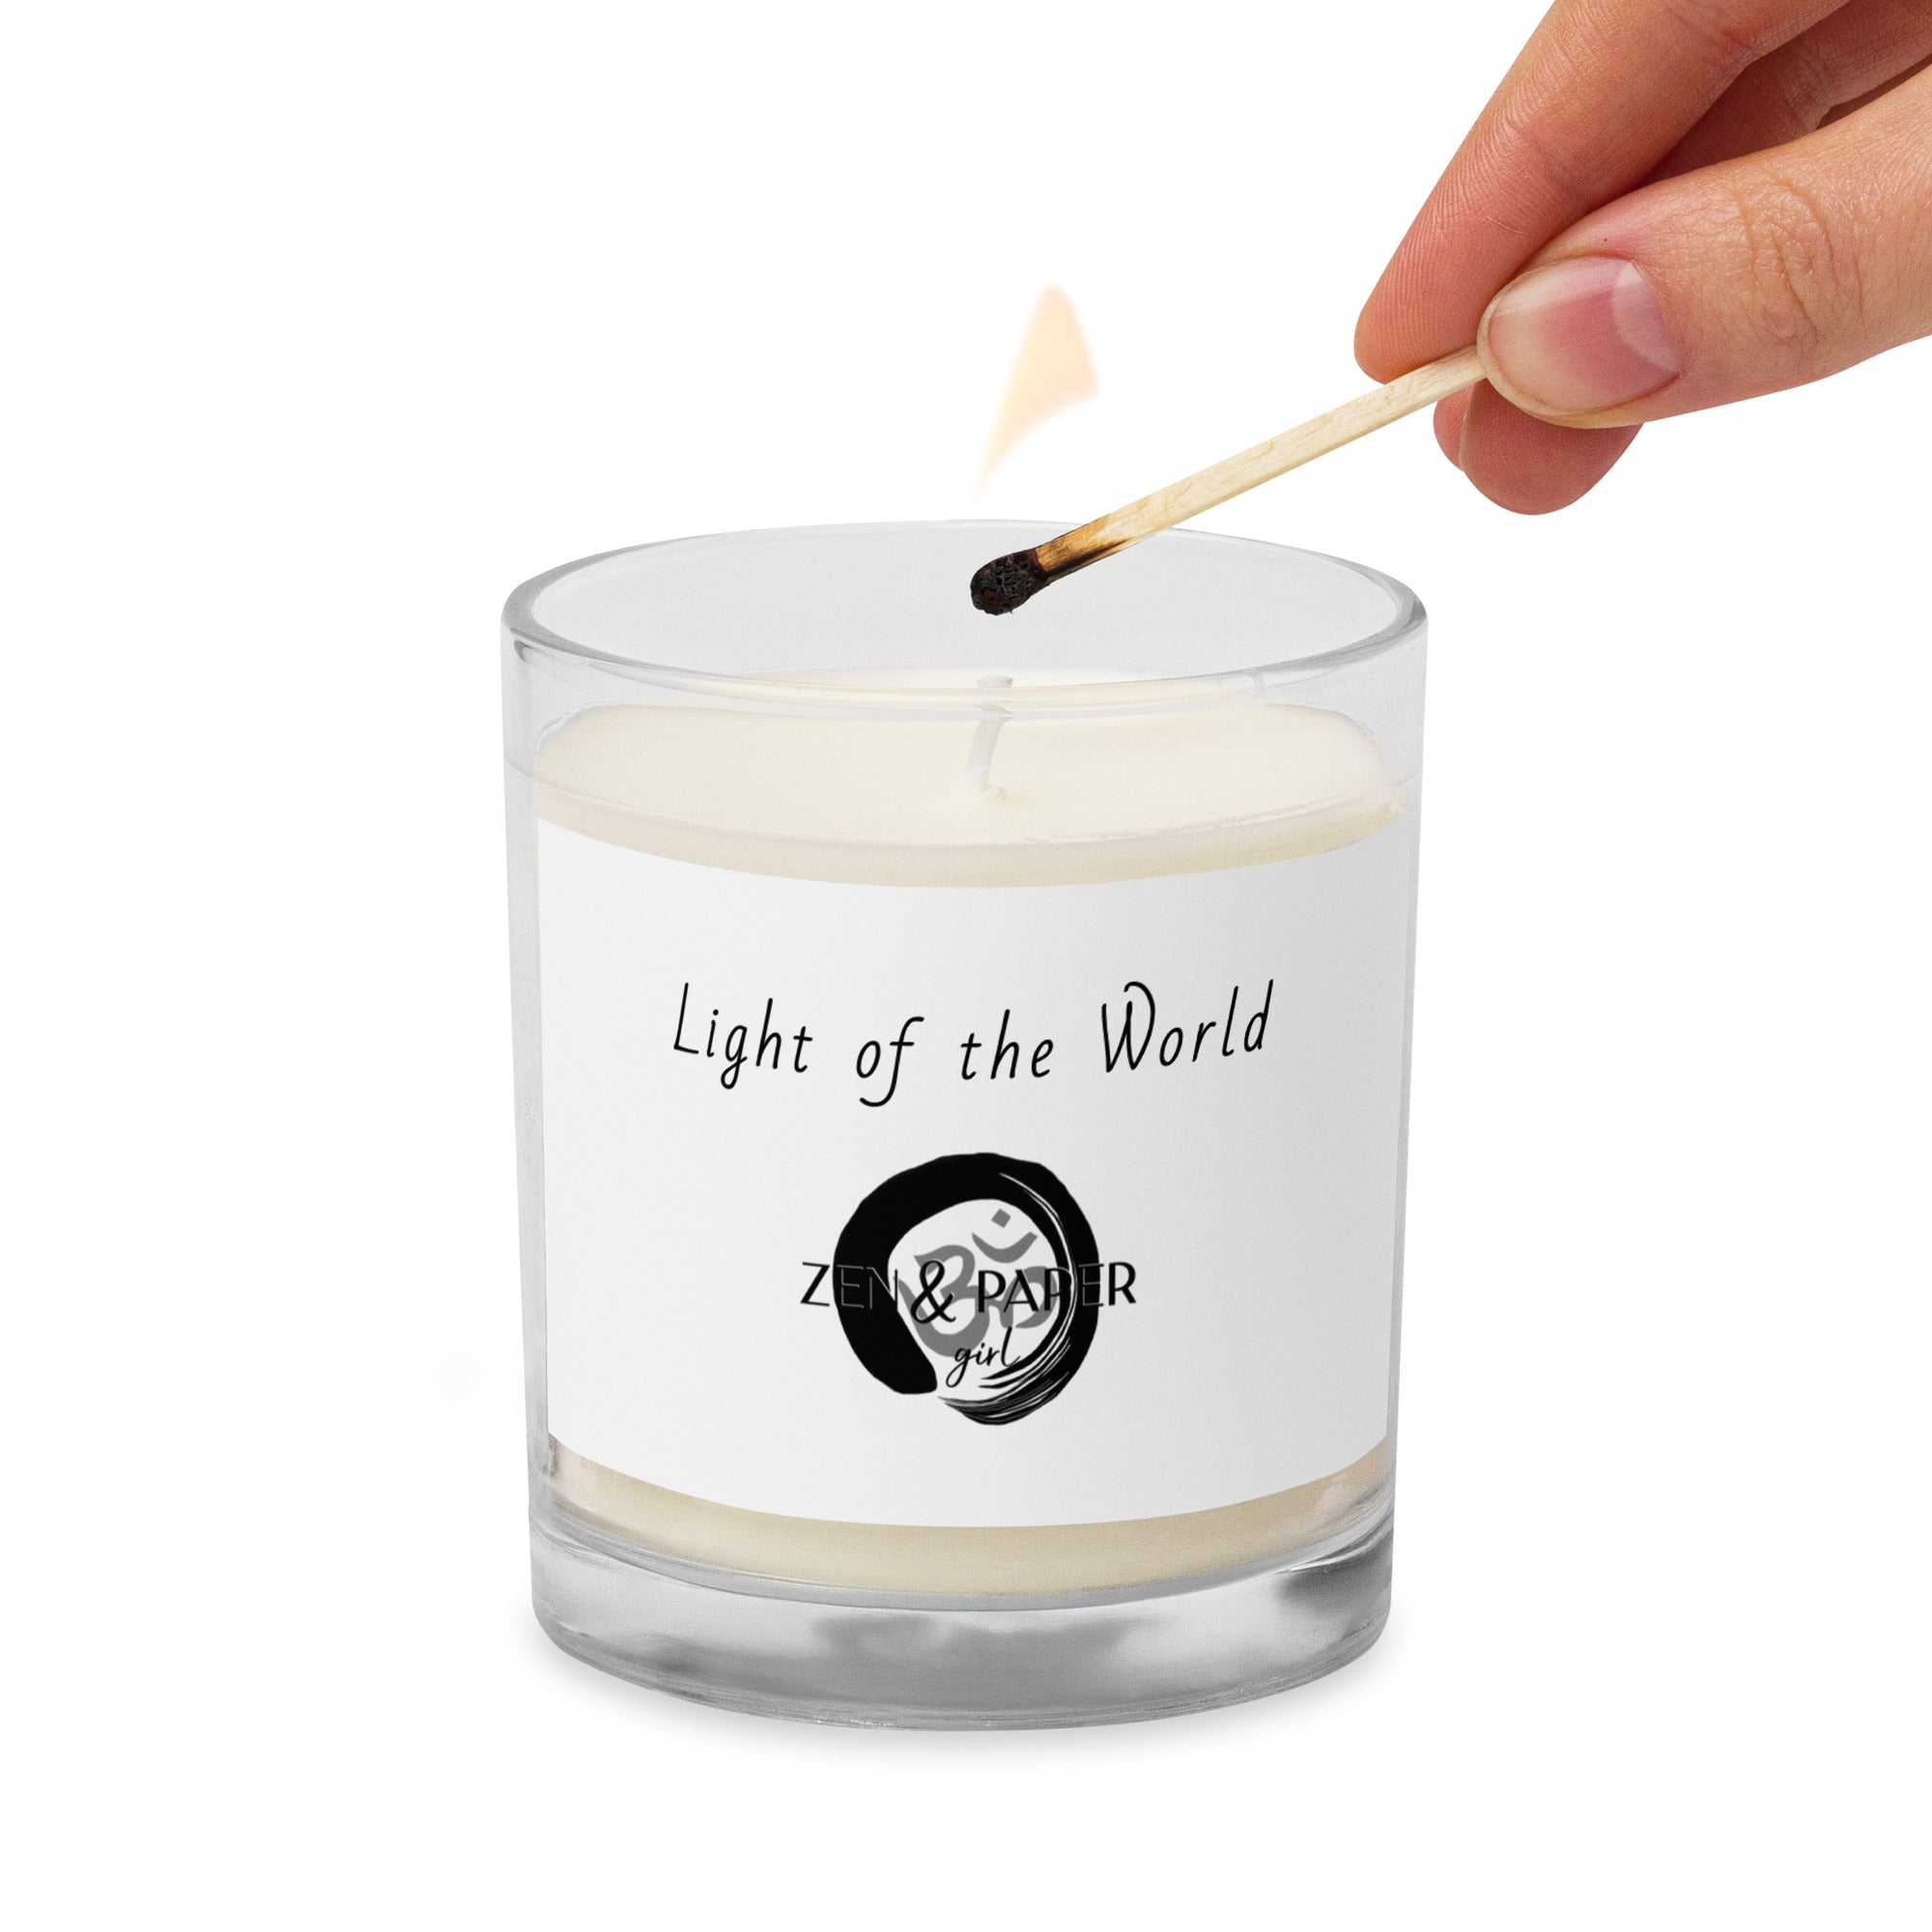 Zen @ Home Light of the World Votive Candle